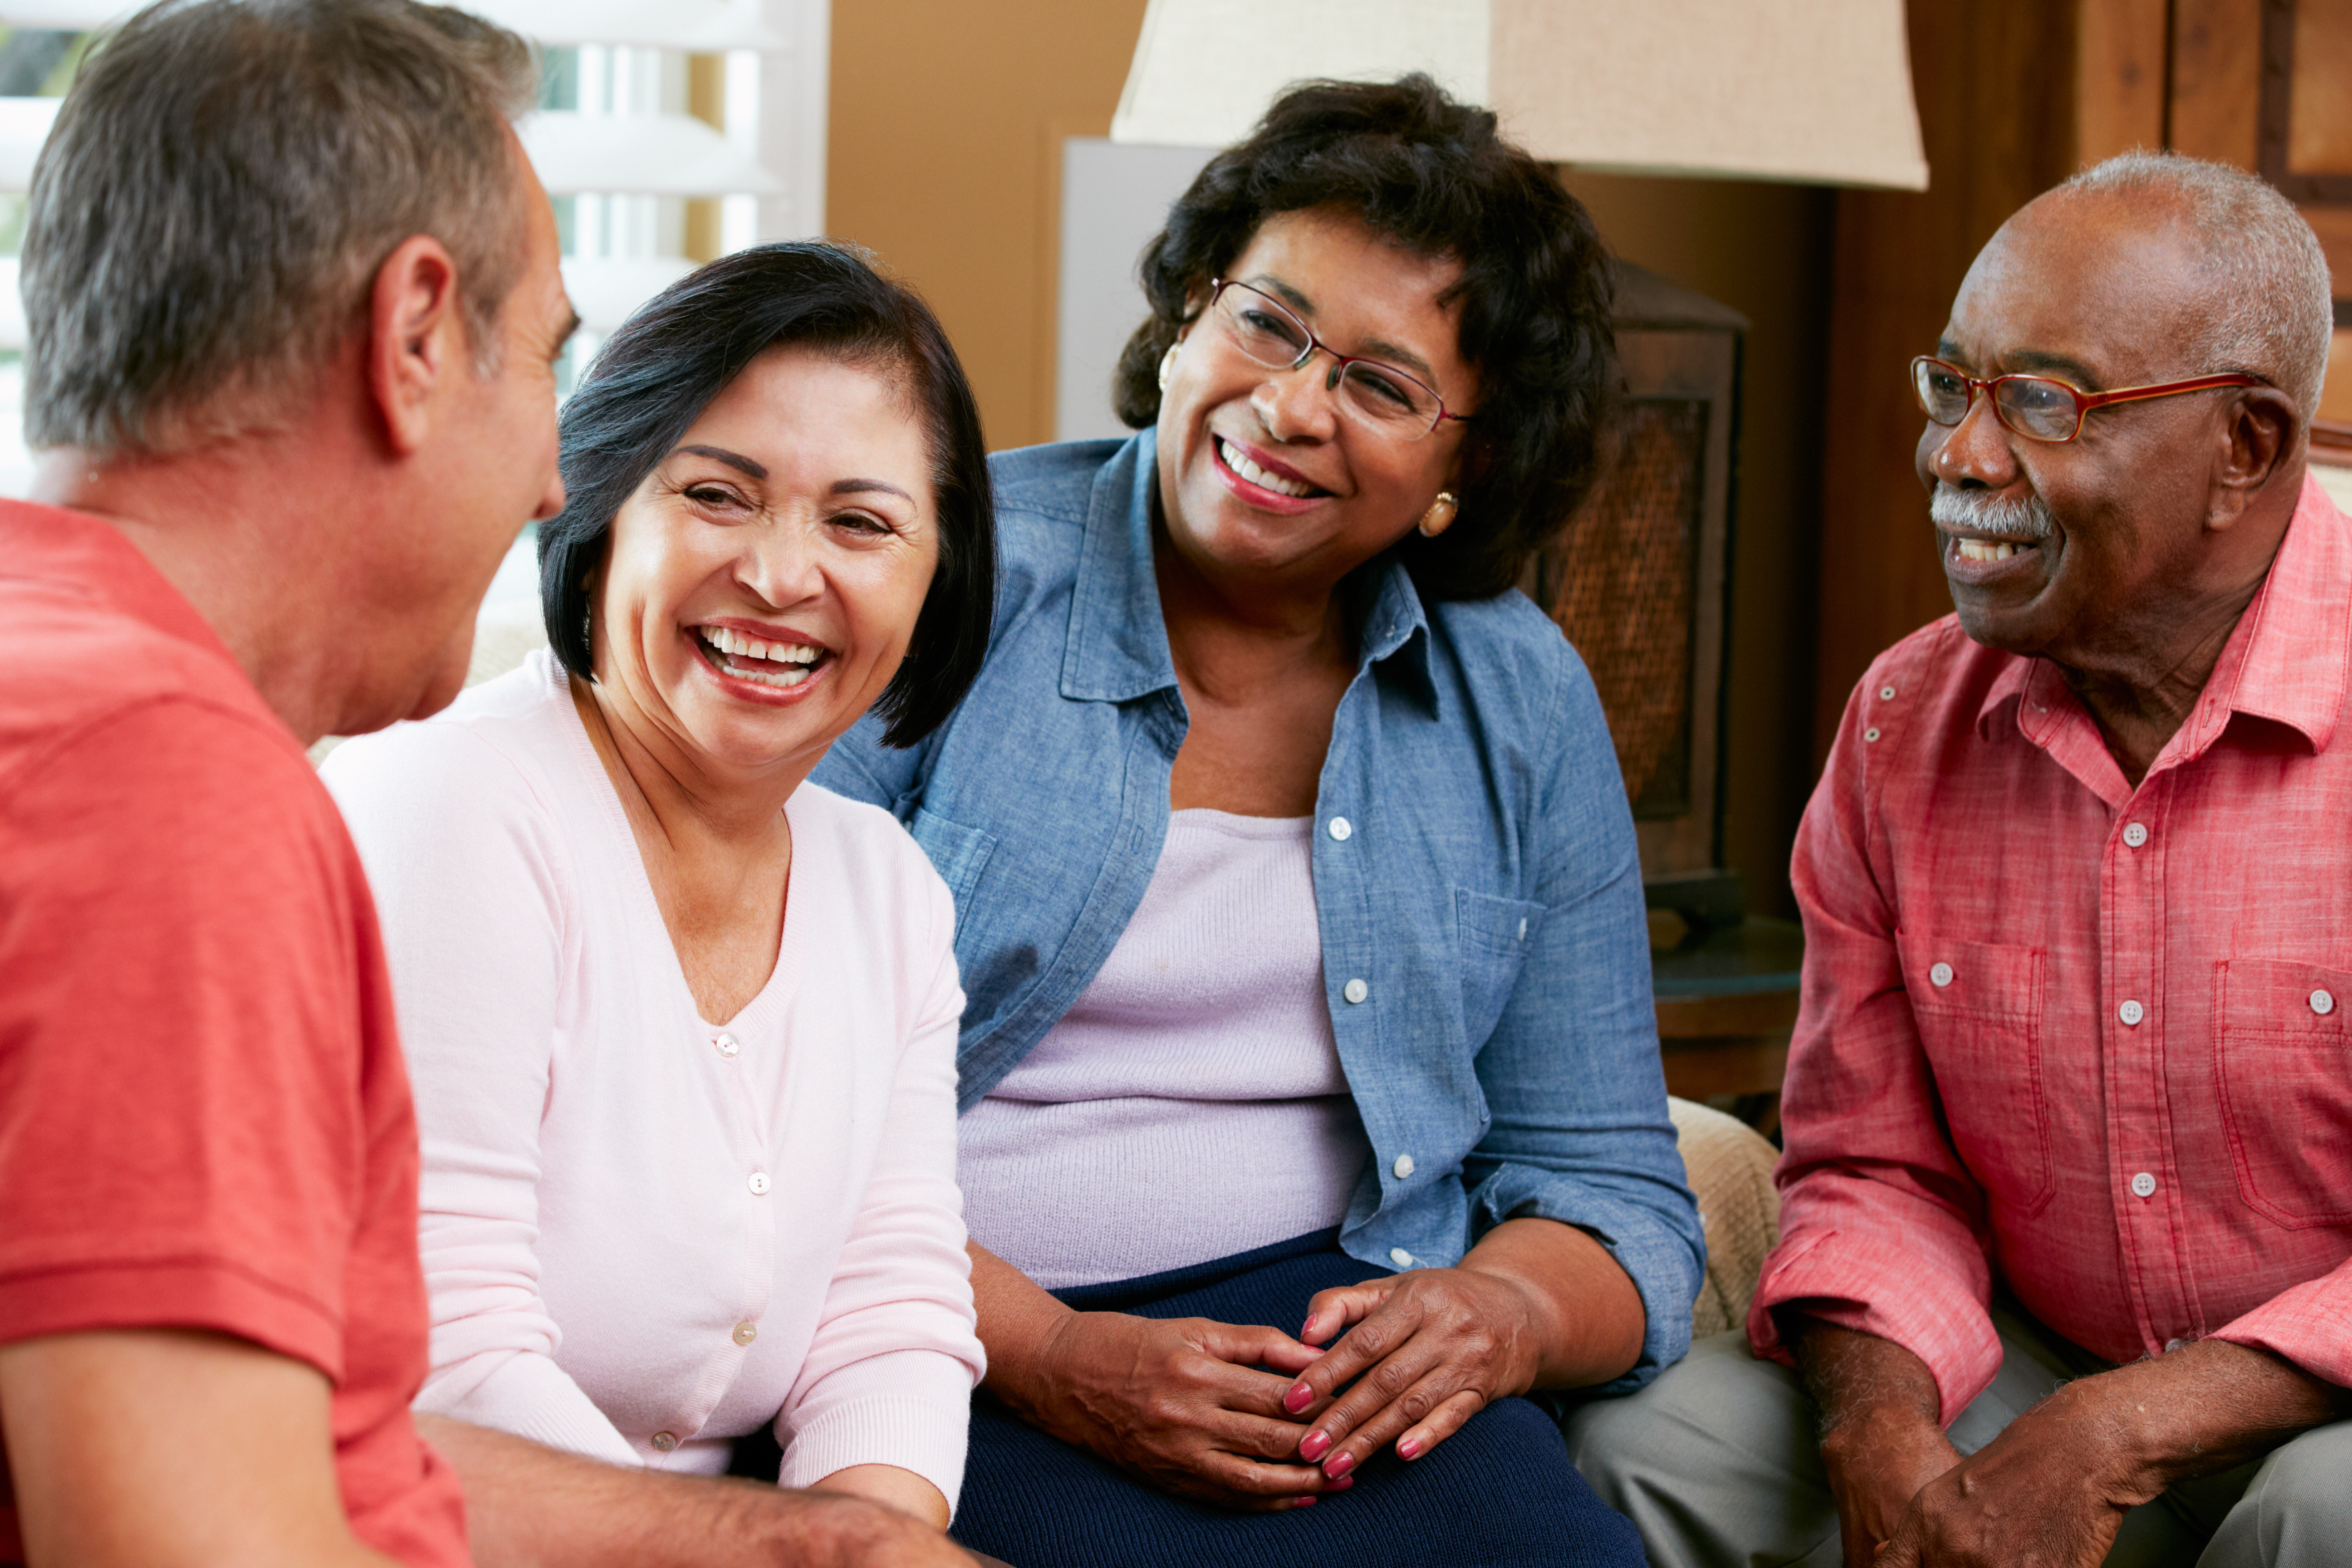 The Benefits of Relationships and Connection for Seniors